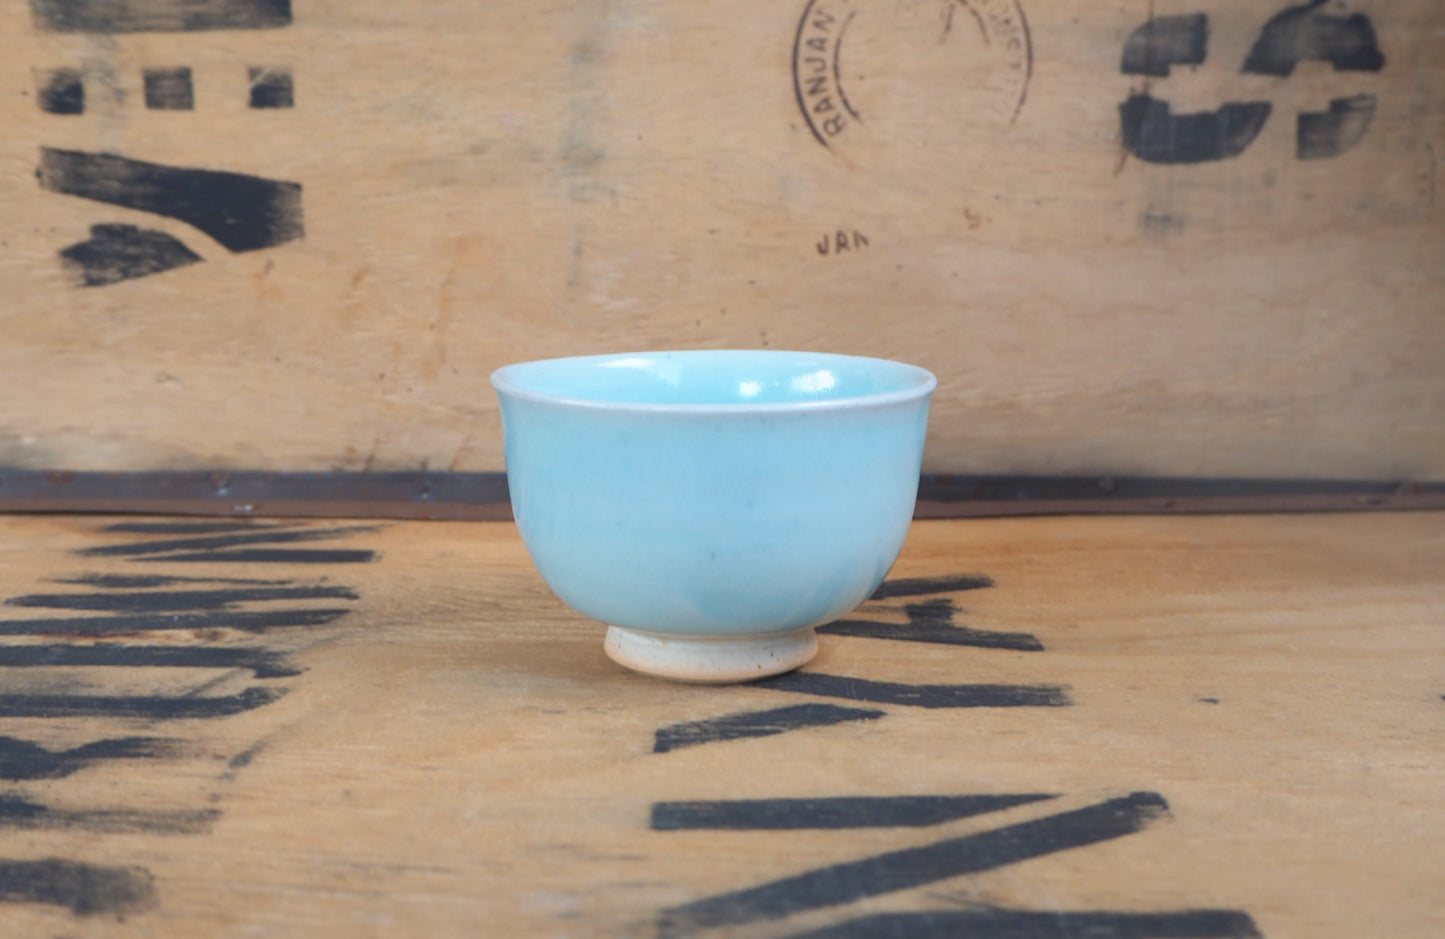 Porcelain Teabowl by Charlie Collier